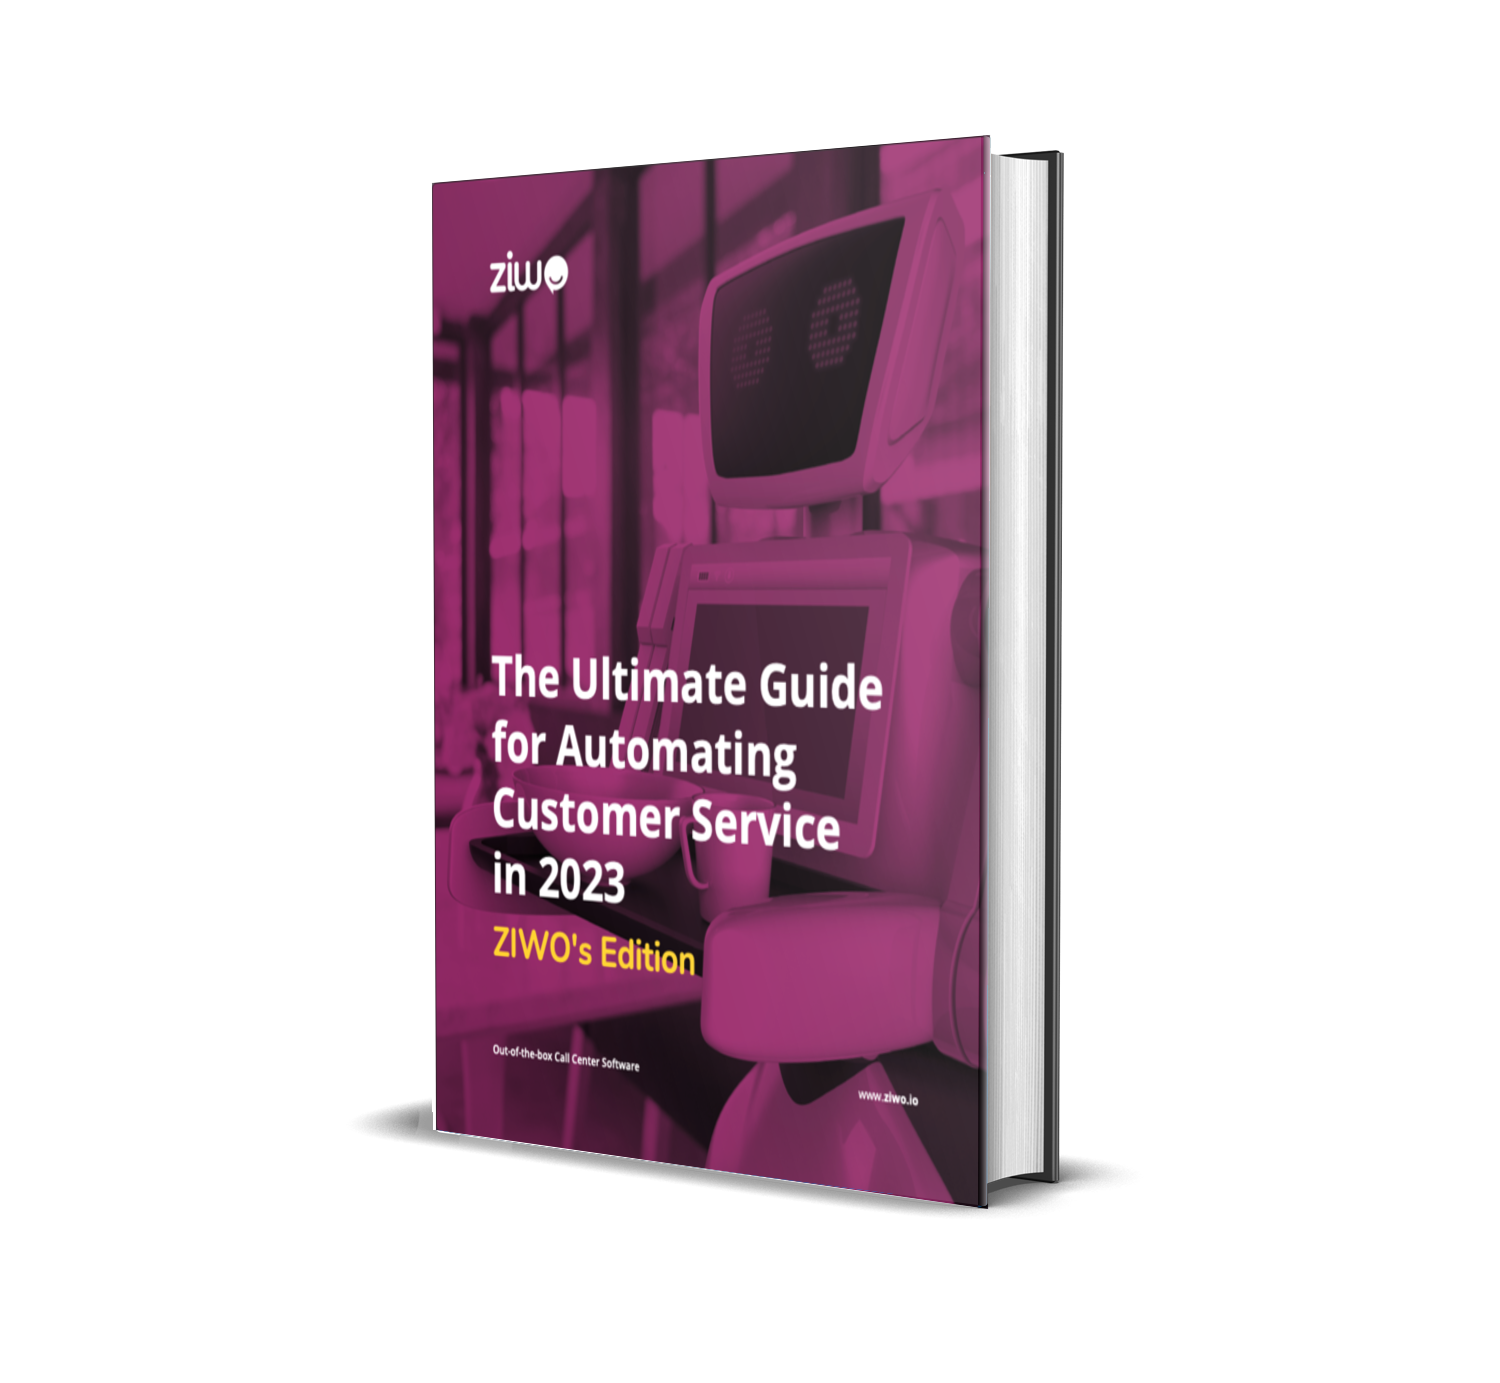 A book with a title "The Ultimate Guide for Automating Customer Service in 2023"